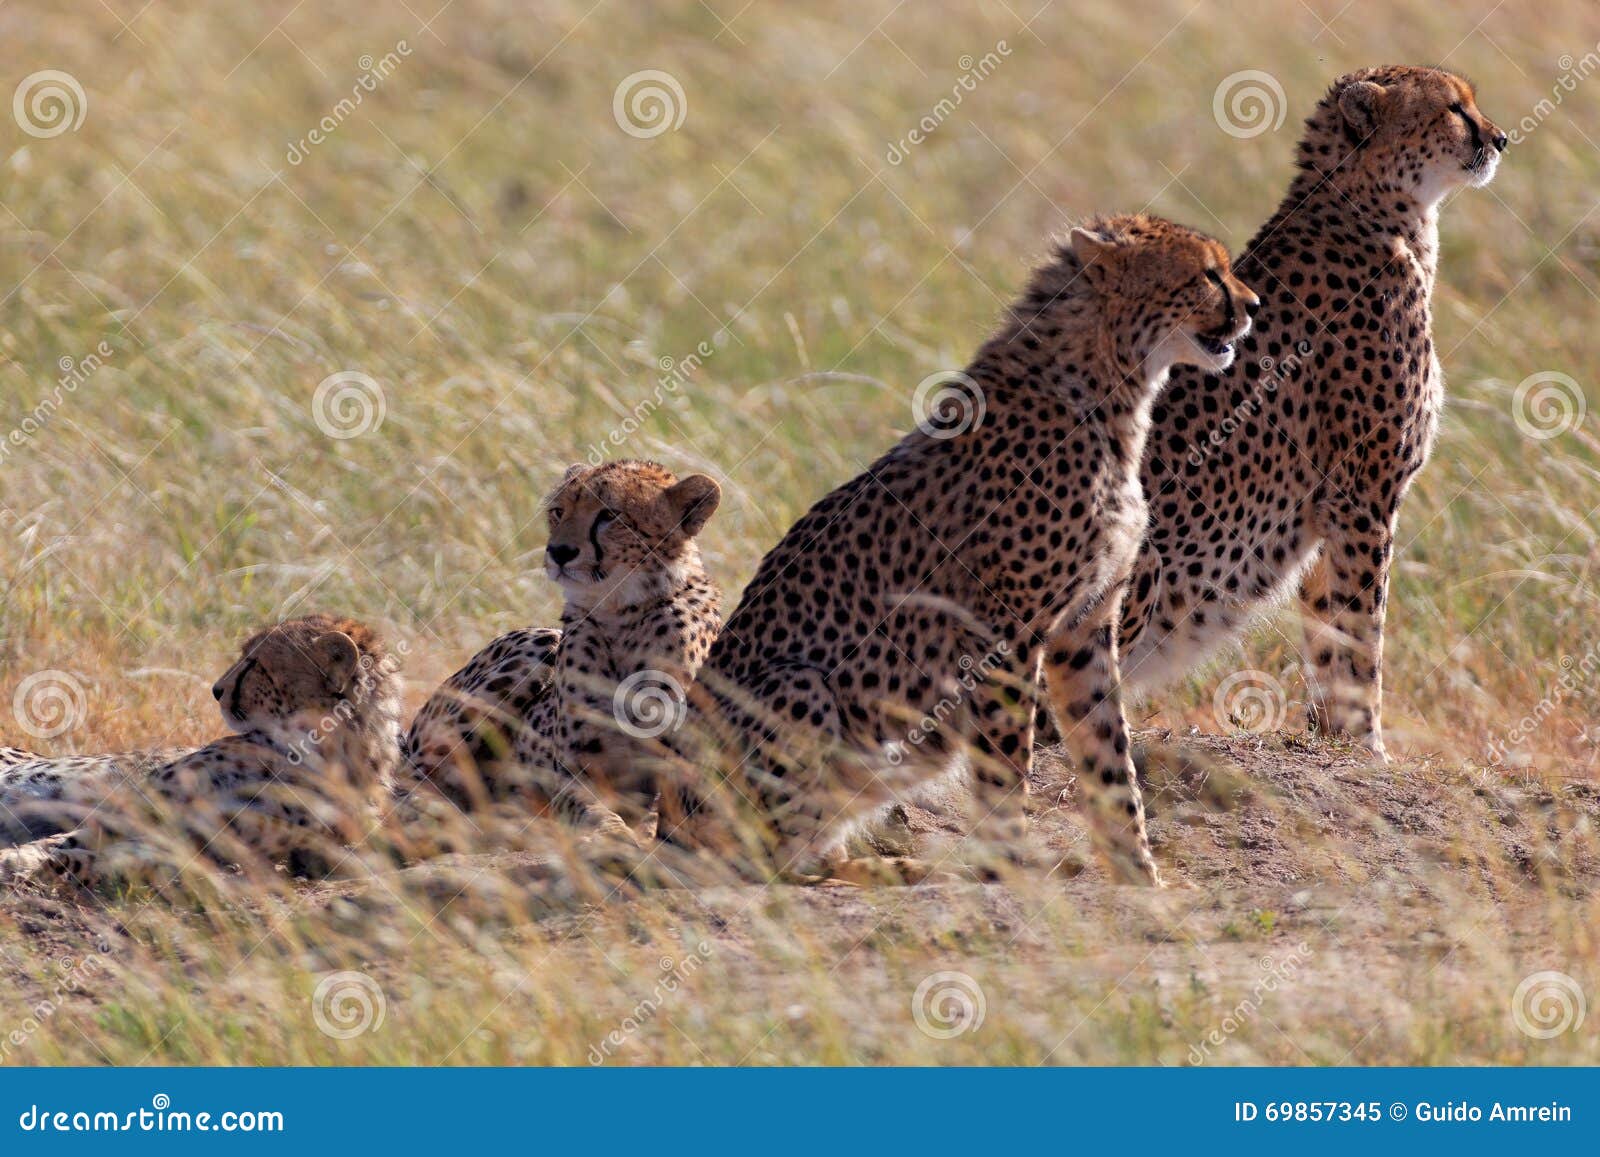 african cheetah family on watch on a knoll